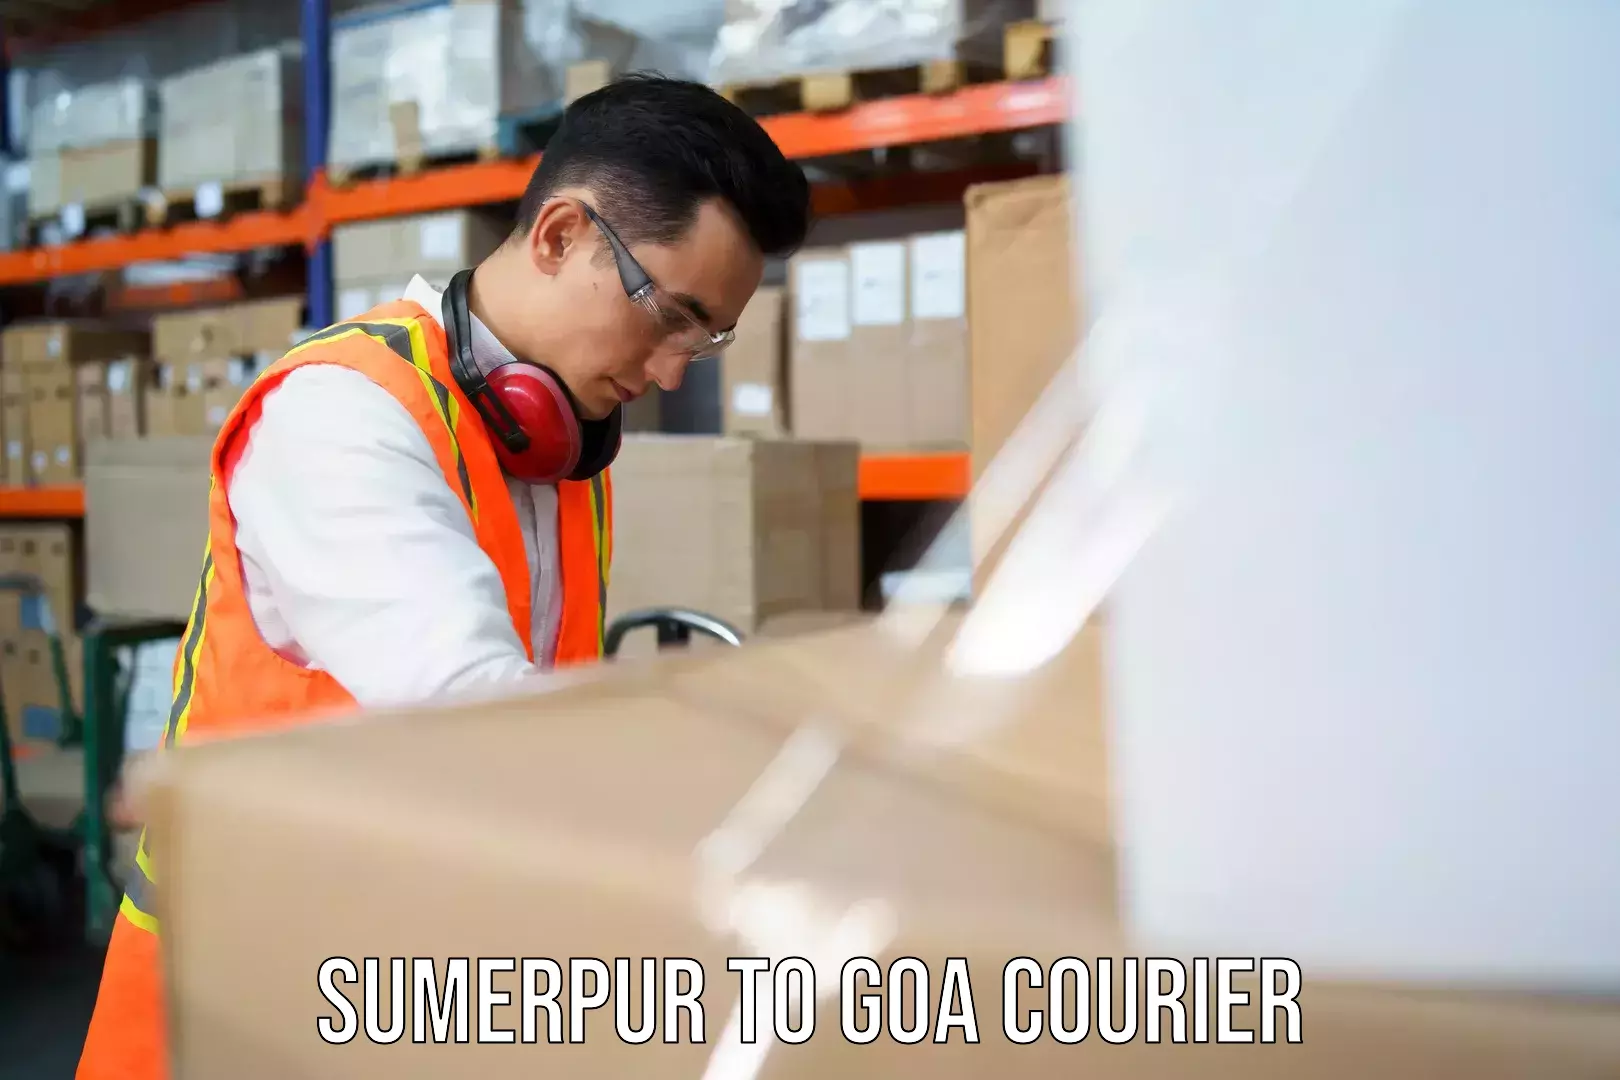 Business delivery service Sumerpur to Goa